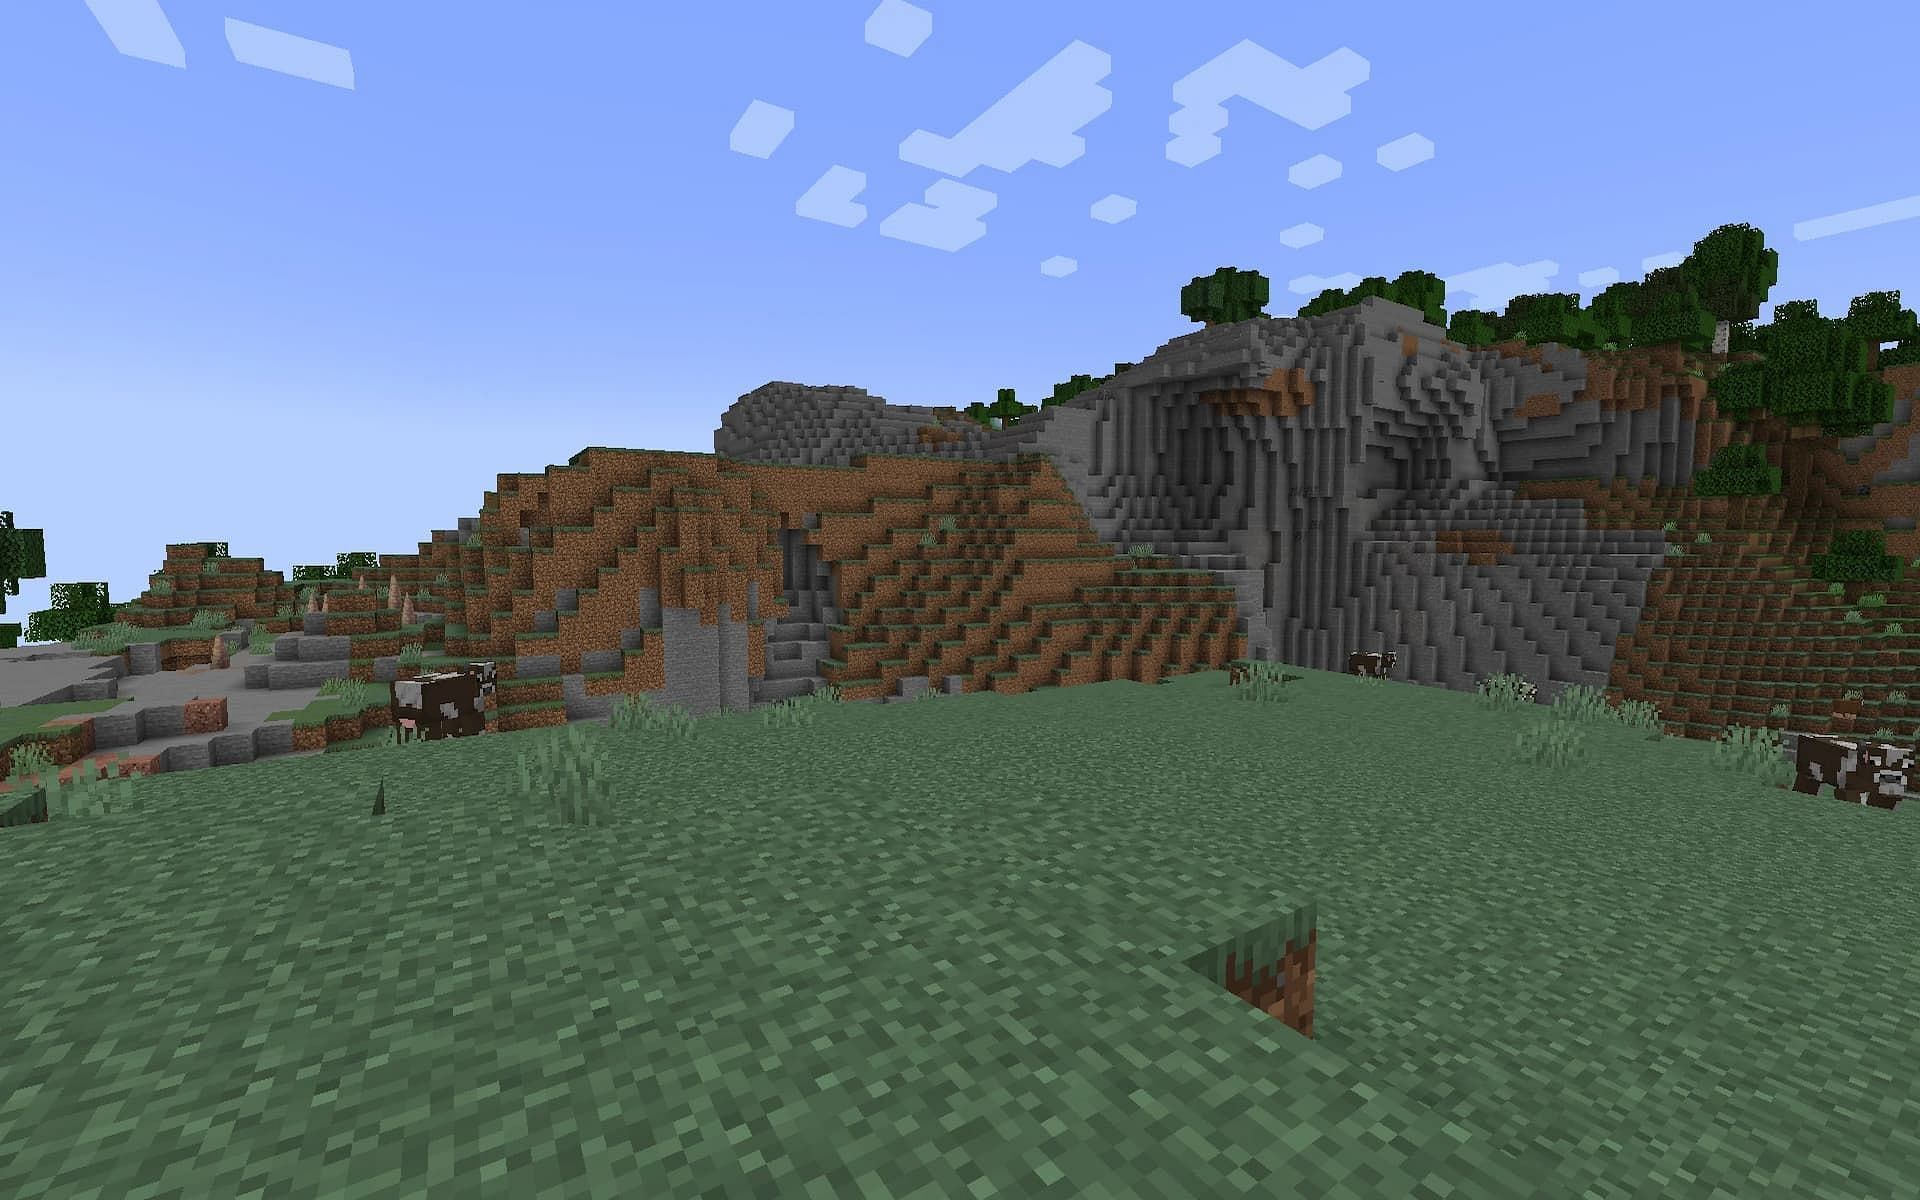 Players can find many biomes with the Biome Finder tool (Image via minecraft.fandom.com)